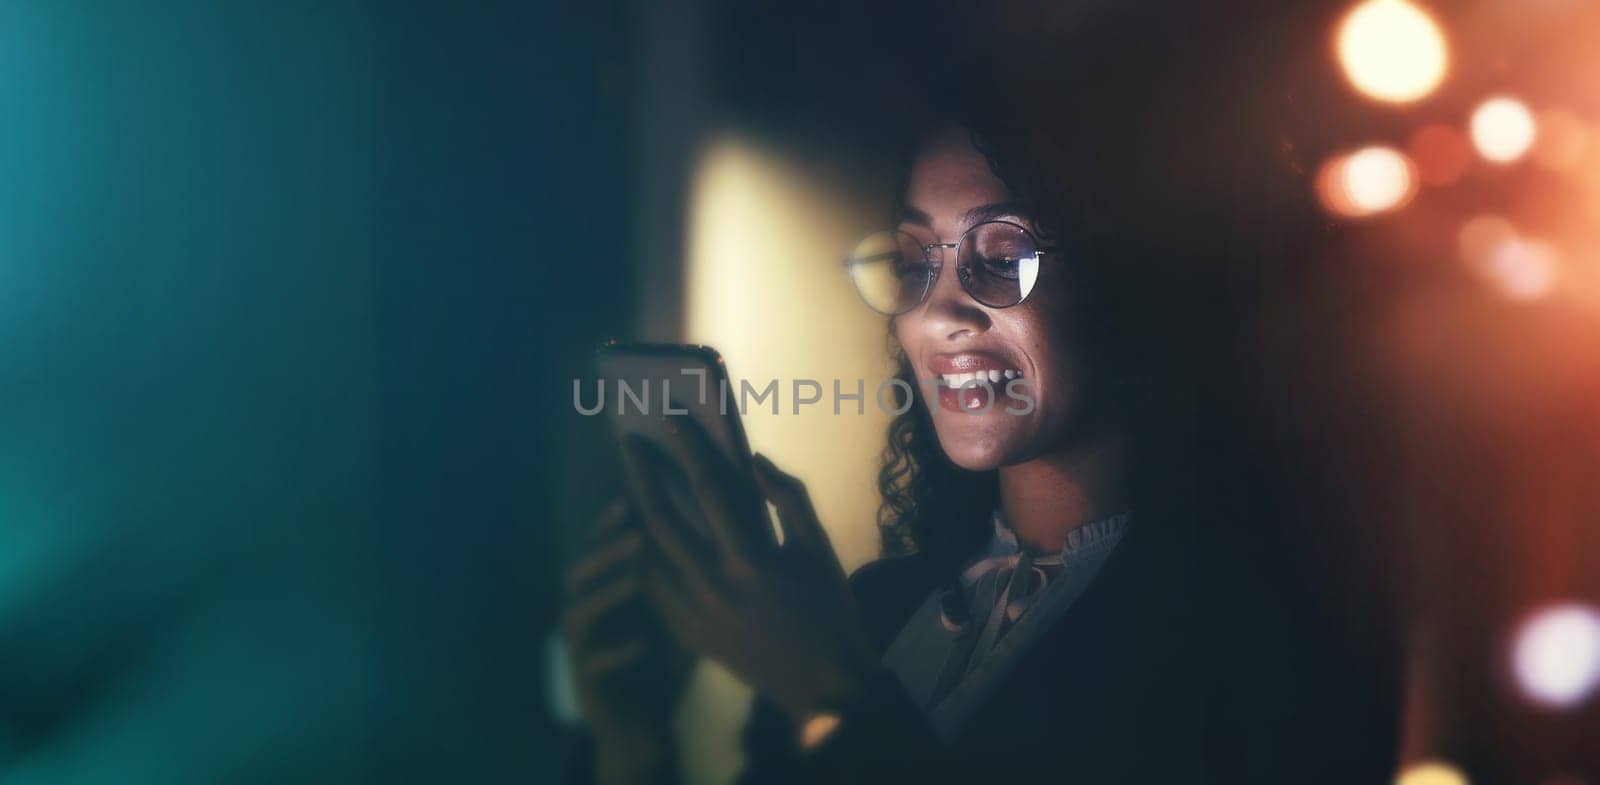 Businesswoman, phone and communication at night for social media, chat or networking on dark background. Female employee smile holding smartphone working late for online planning strategy on mockup.